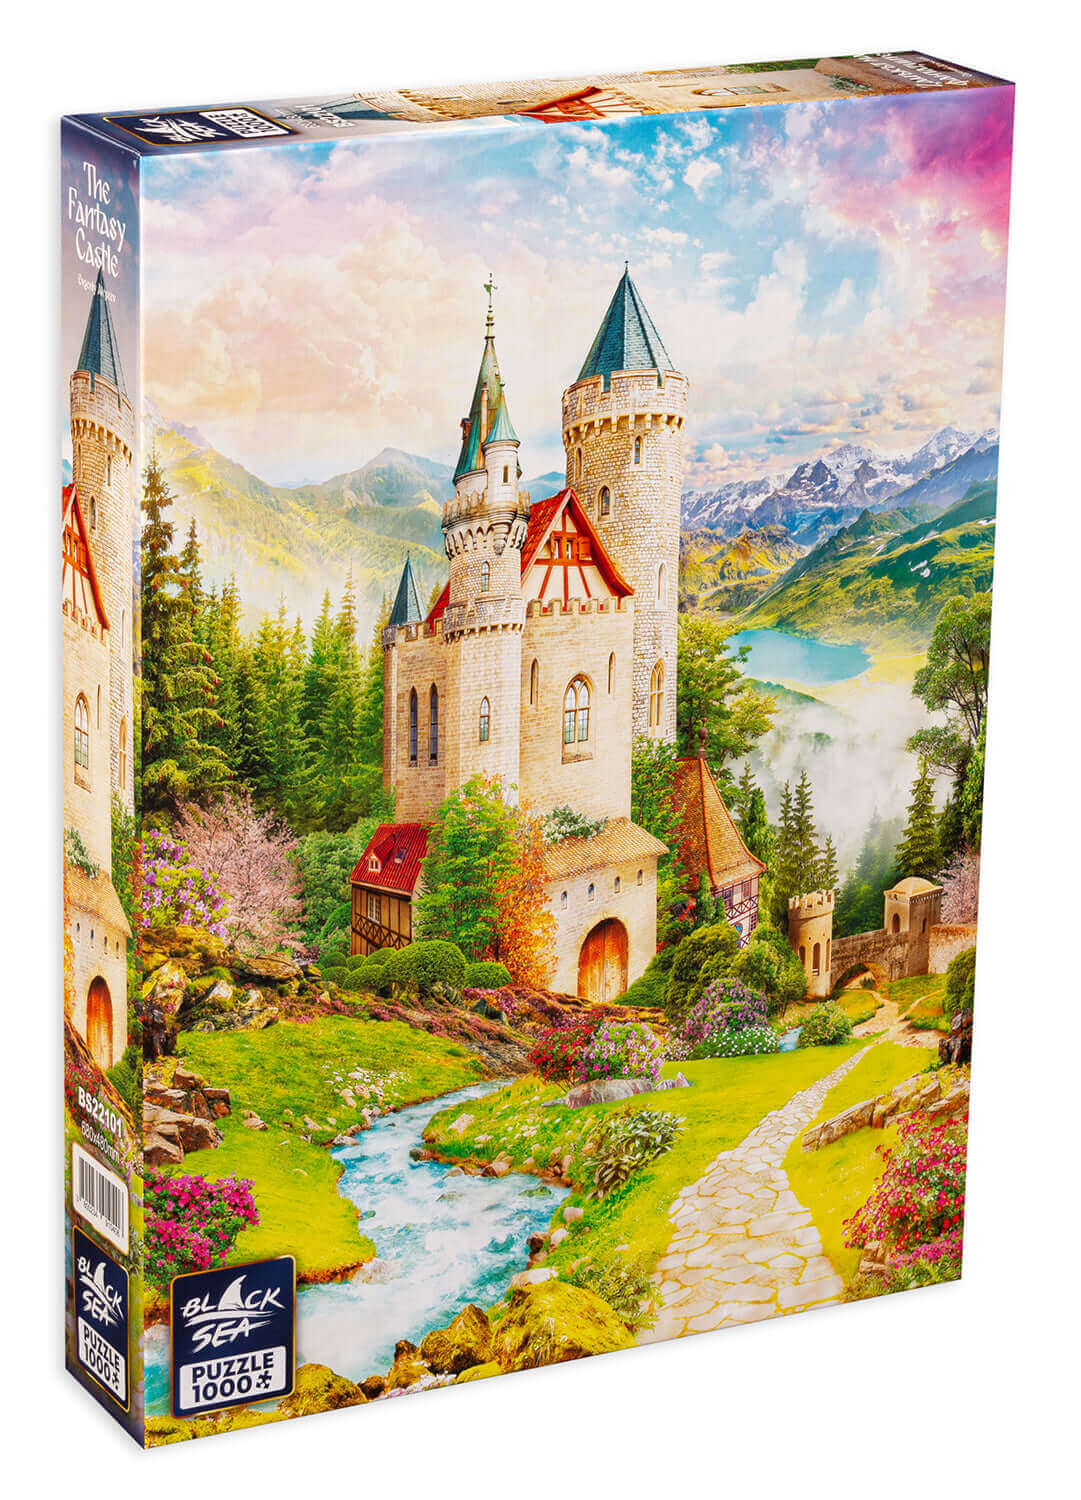 Puzzle Black Sea 1000 pieces - The Fantasy Castle, A majestic castle made of stone reigns over the hill, surrounded by emerald fields where the grass dances with the winds. Fountains adorn the façade of the castle. Their jets of water rise towards the ski